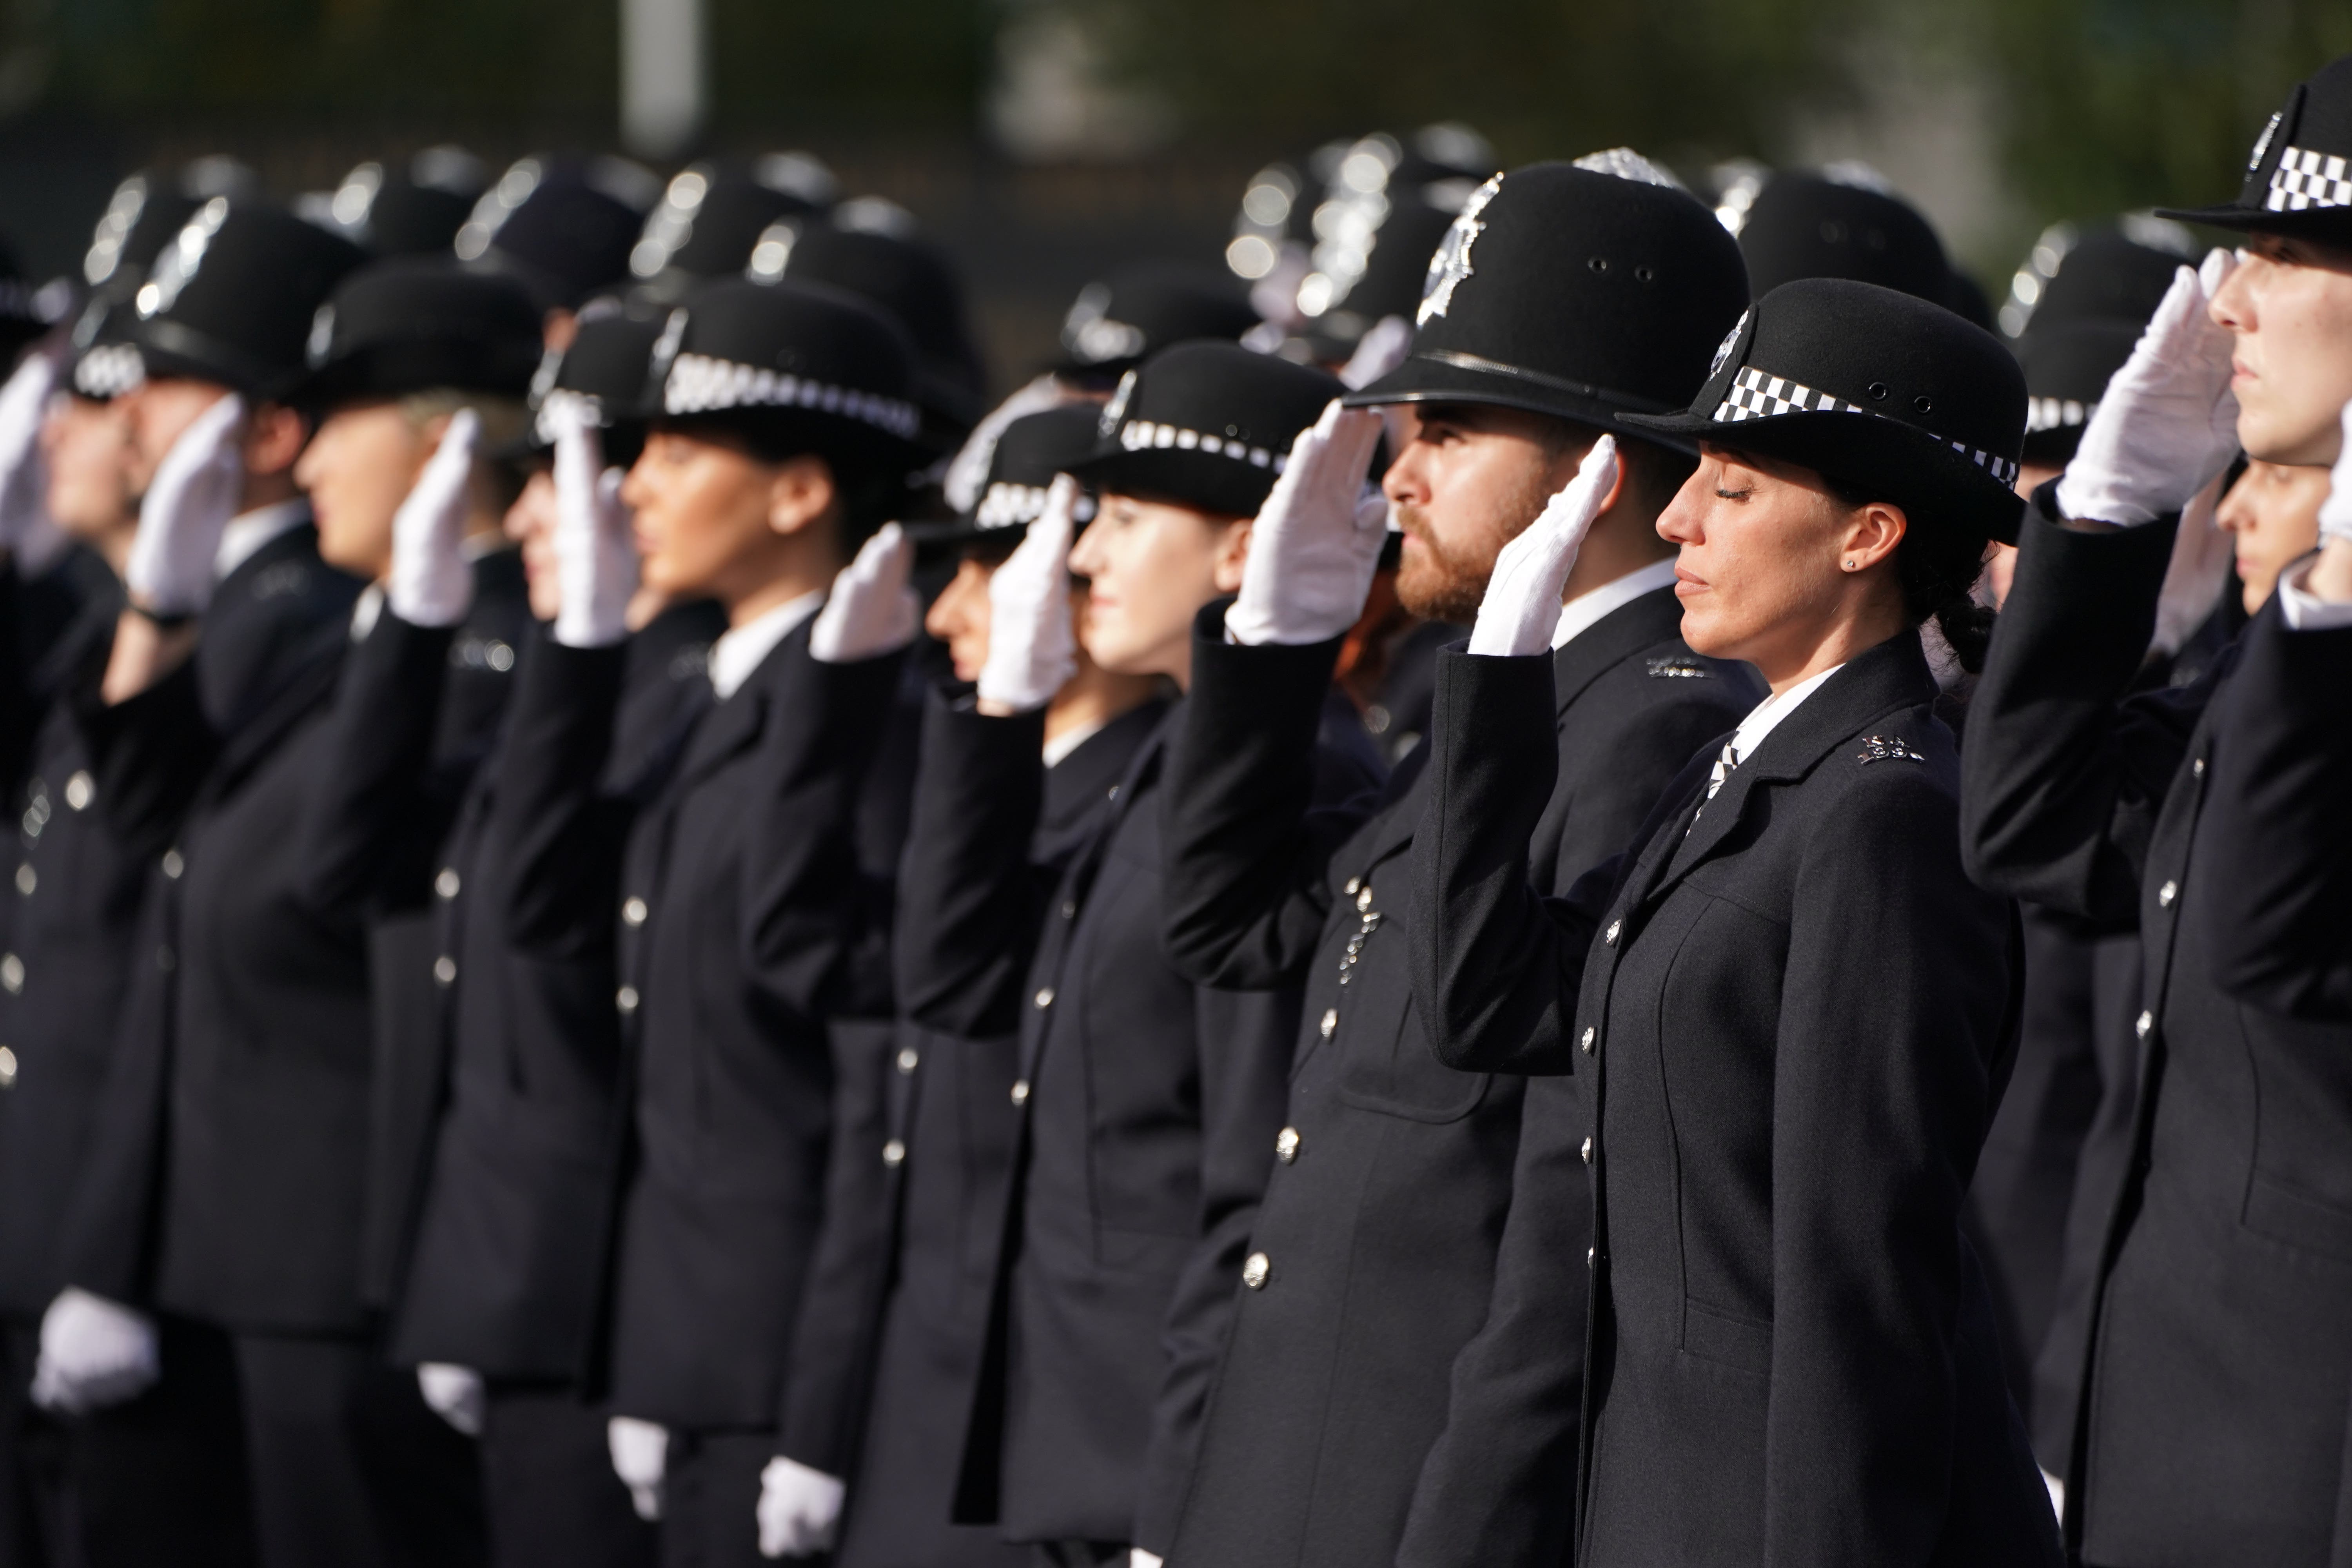 More than 1,500 police officers and staff in England and Wales faced complaints linked to their treatment of women in a six-month period, new figures show (Kirsty O’Connor/PA)